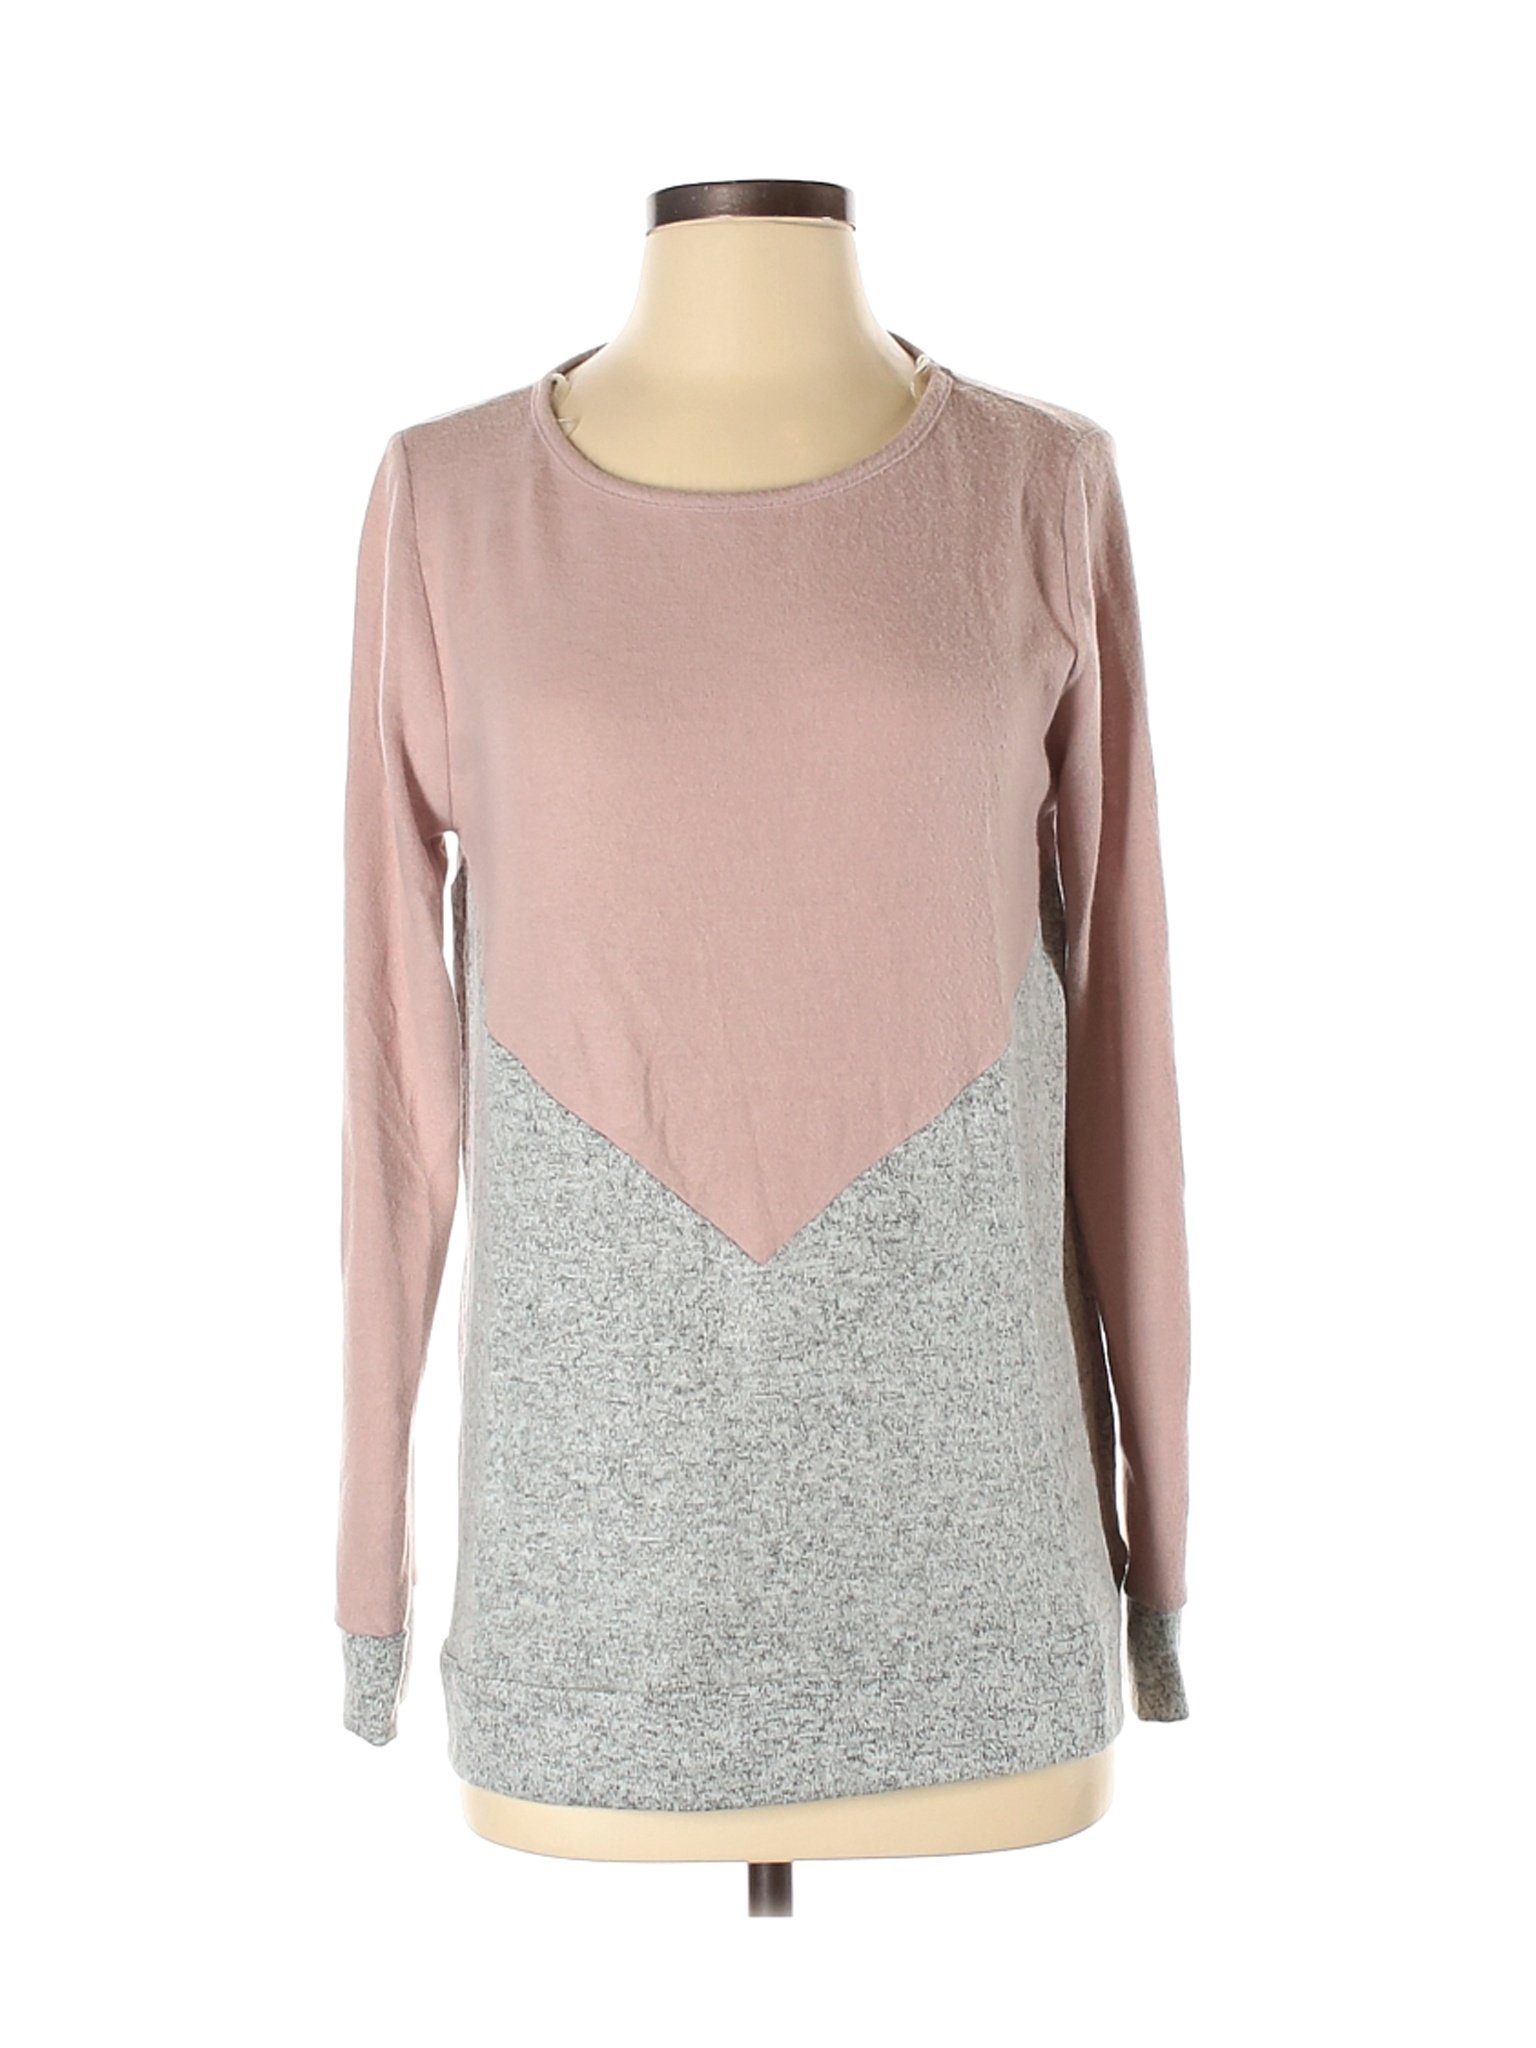 NWT Staccato Women Pink Pullover Sweater S | eBay